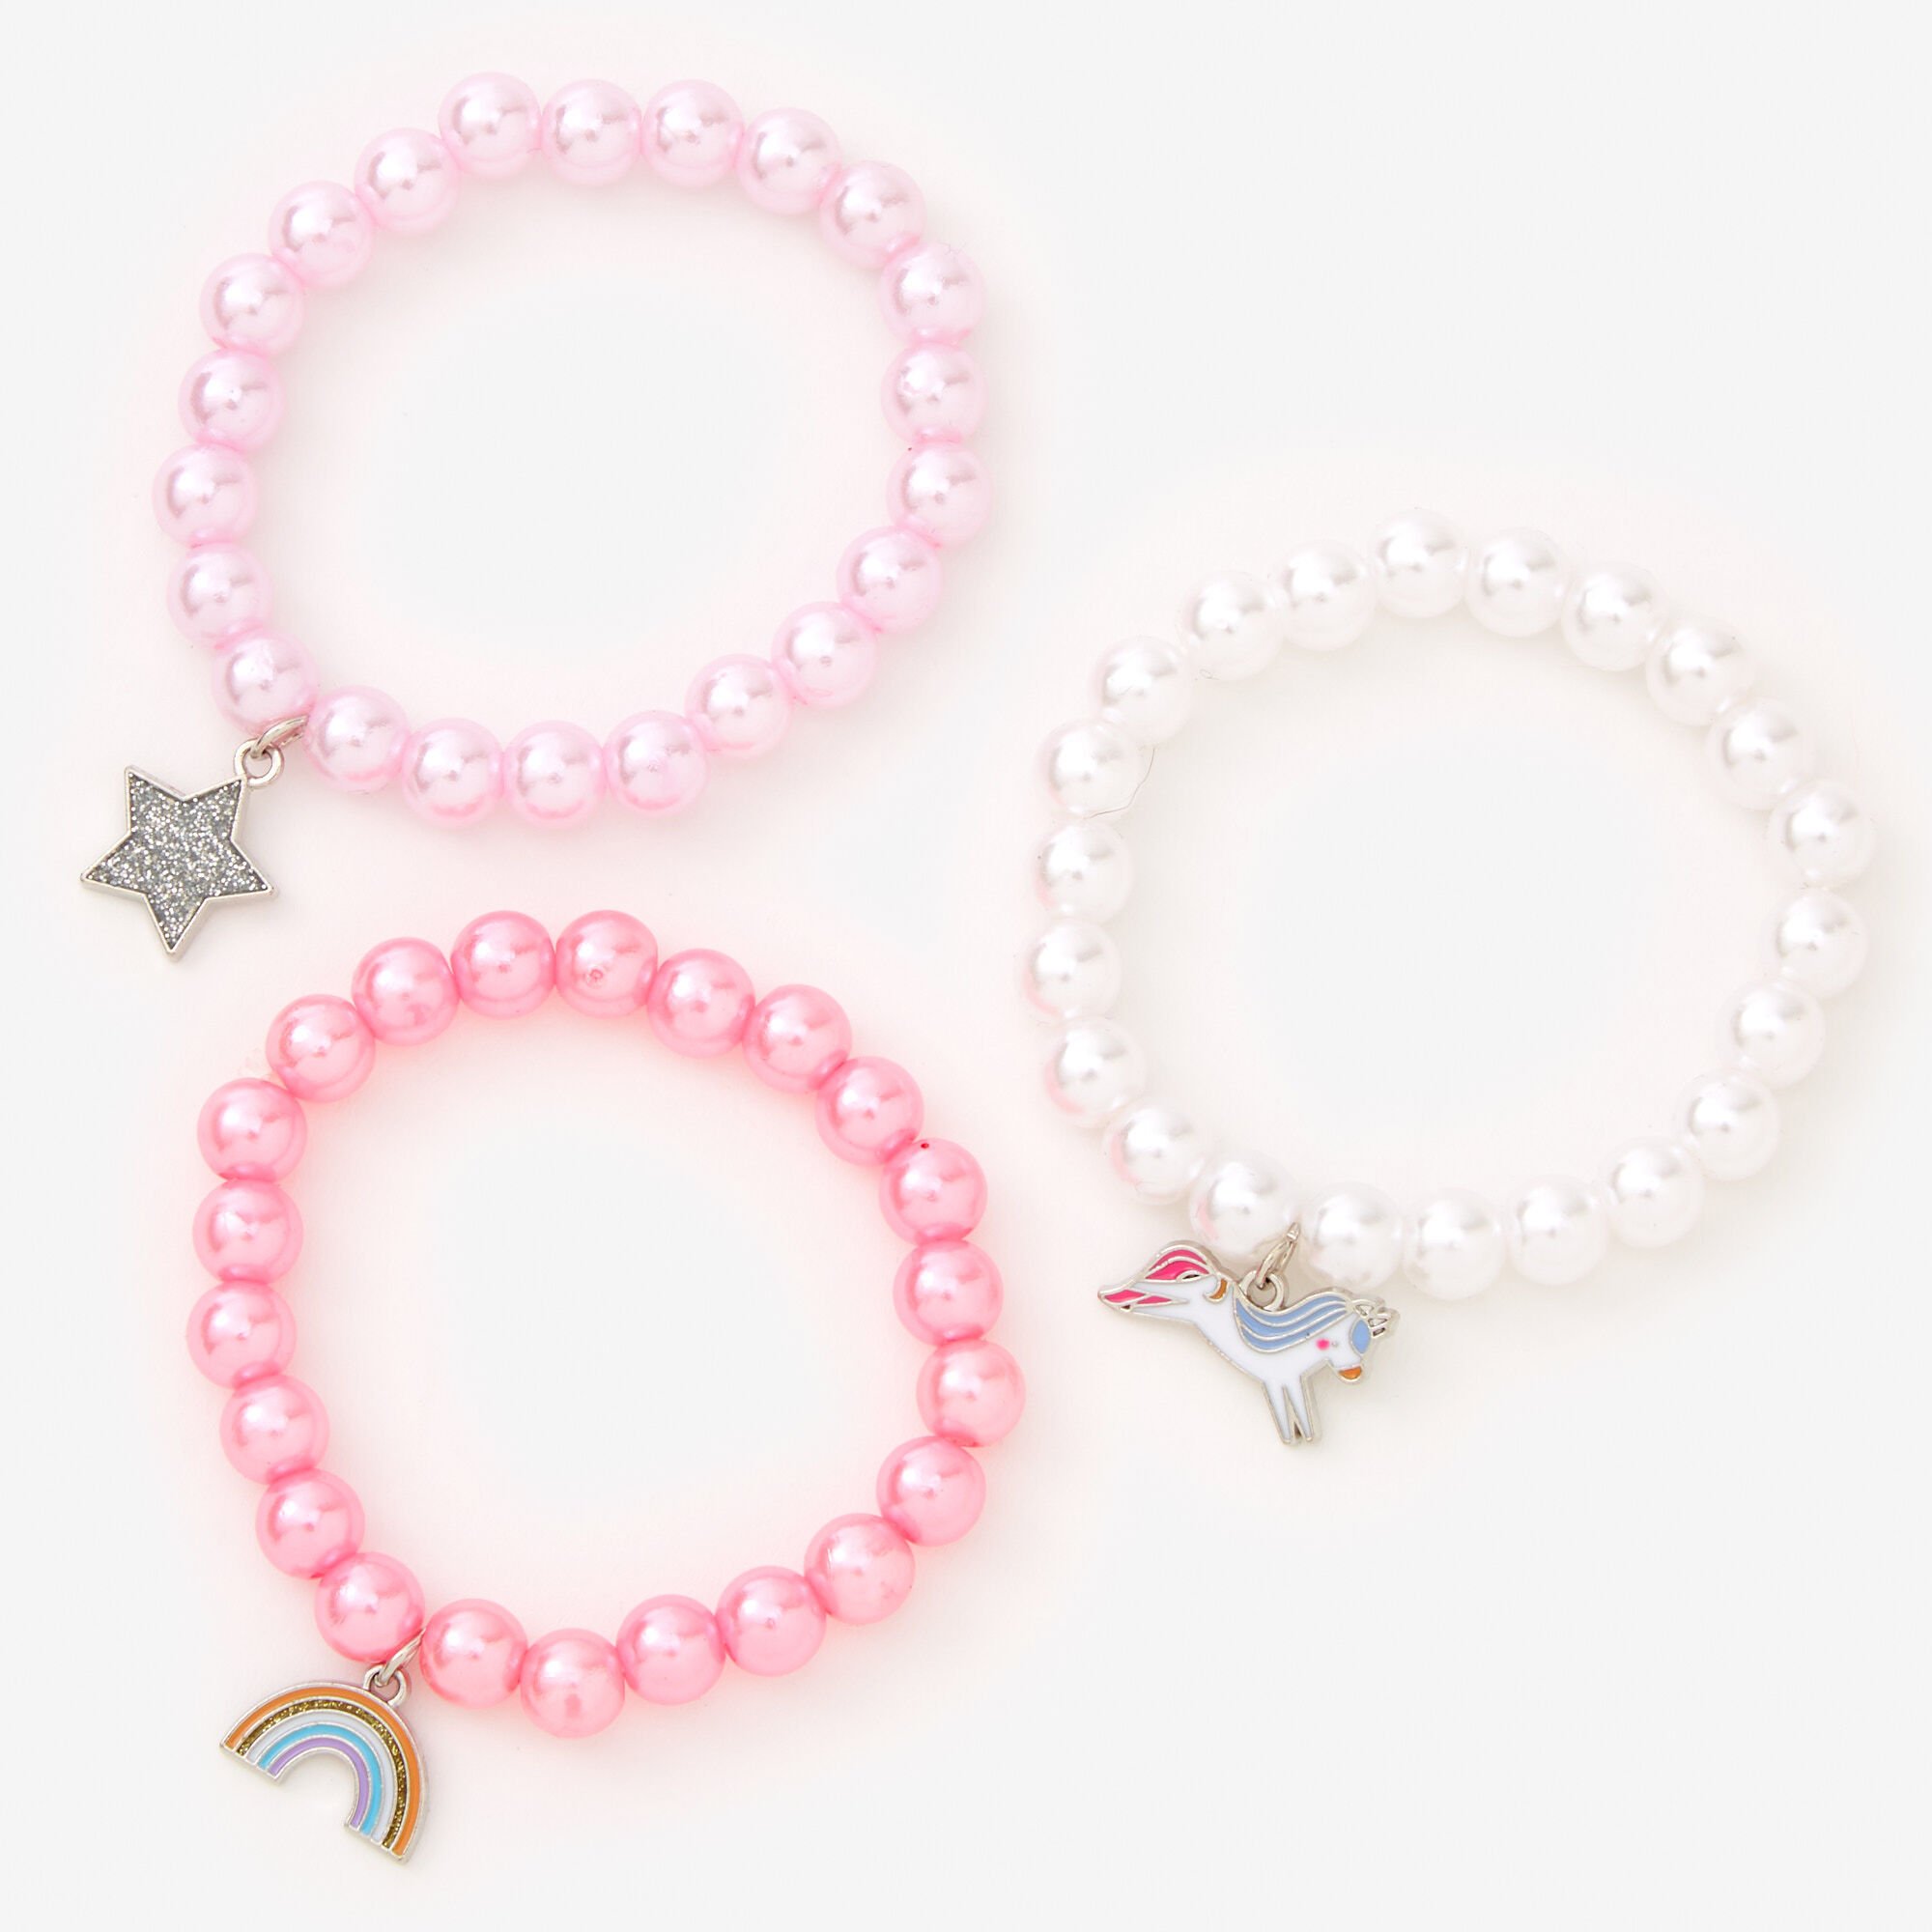 View Claires Club Monochromatic Unicorn Beaded Stretch Bracelets 3 Pack Pink information